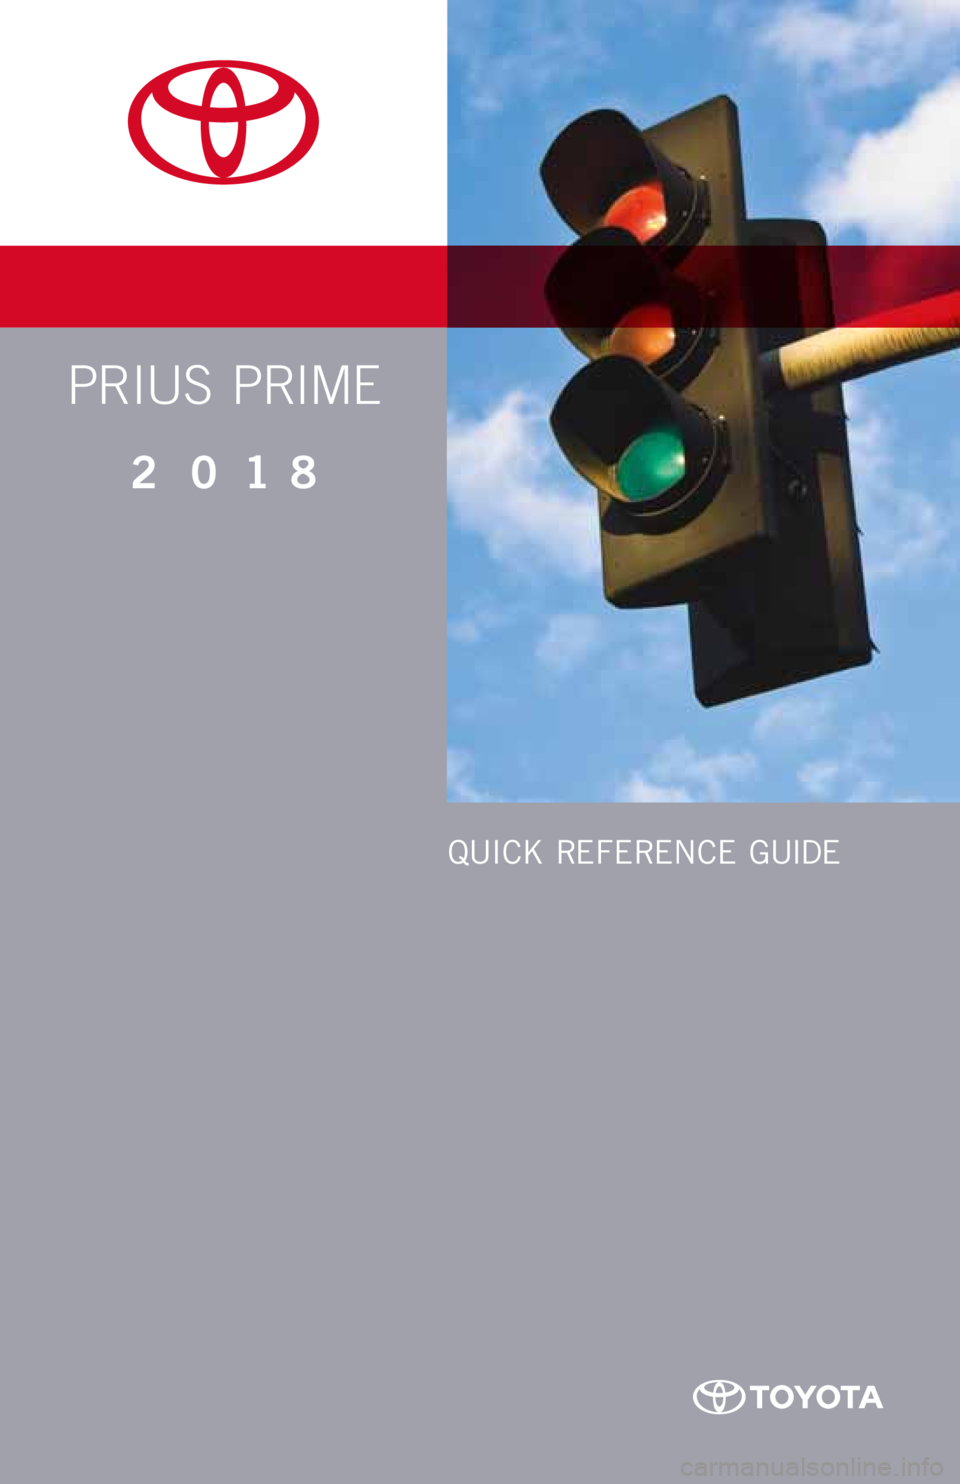 TOYOTA PRIUS PRIME 2018  Owners Manual (in English) PRIUS  PRIME
2018
QUICK REFERENCE GUIDE 